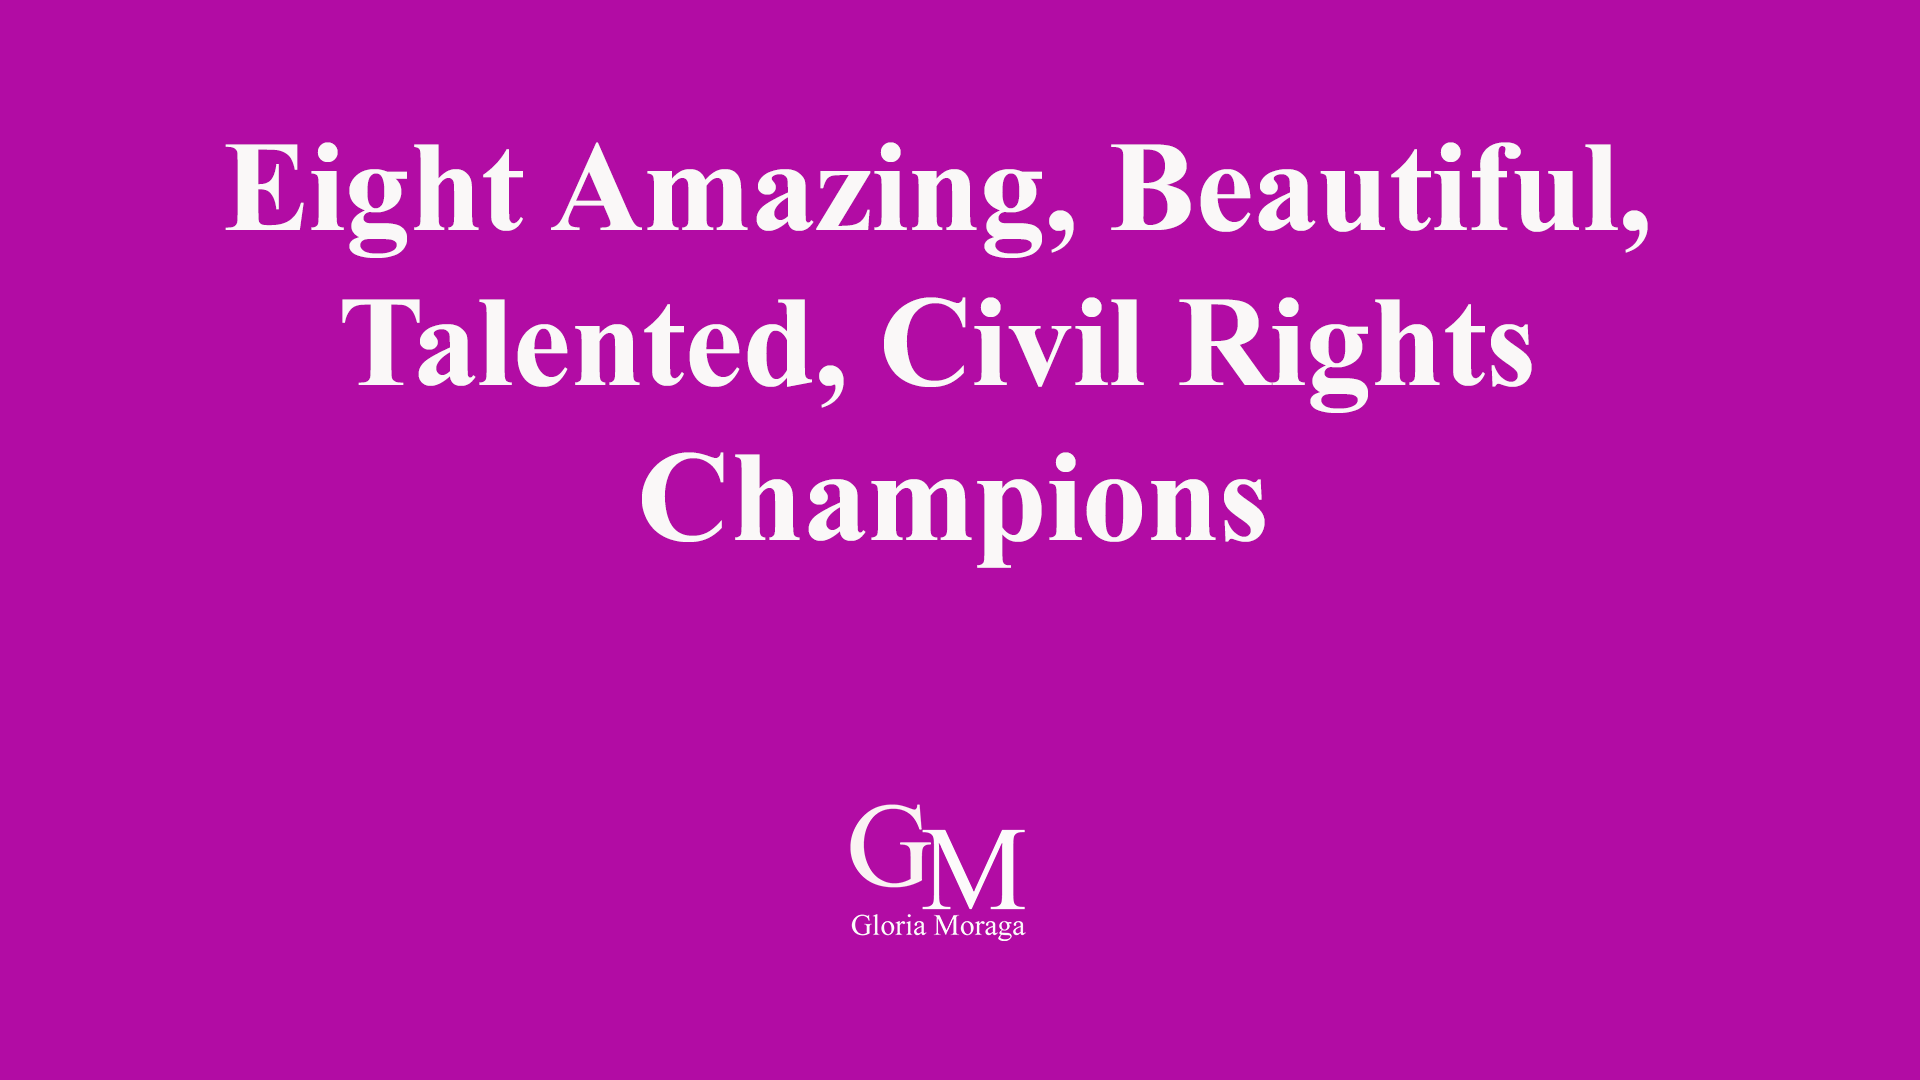 Eight Amazing, Beautiful, Talented, Civil Rights Champions